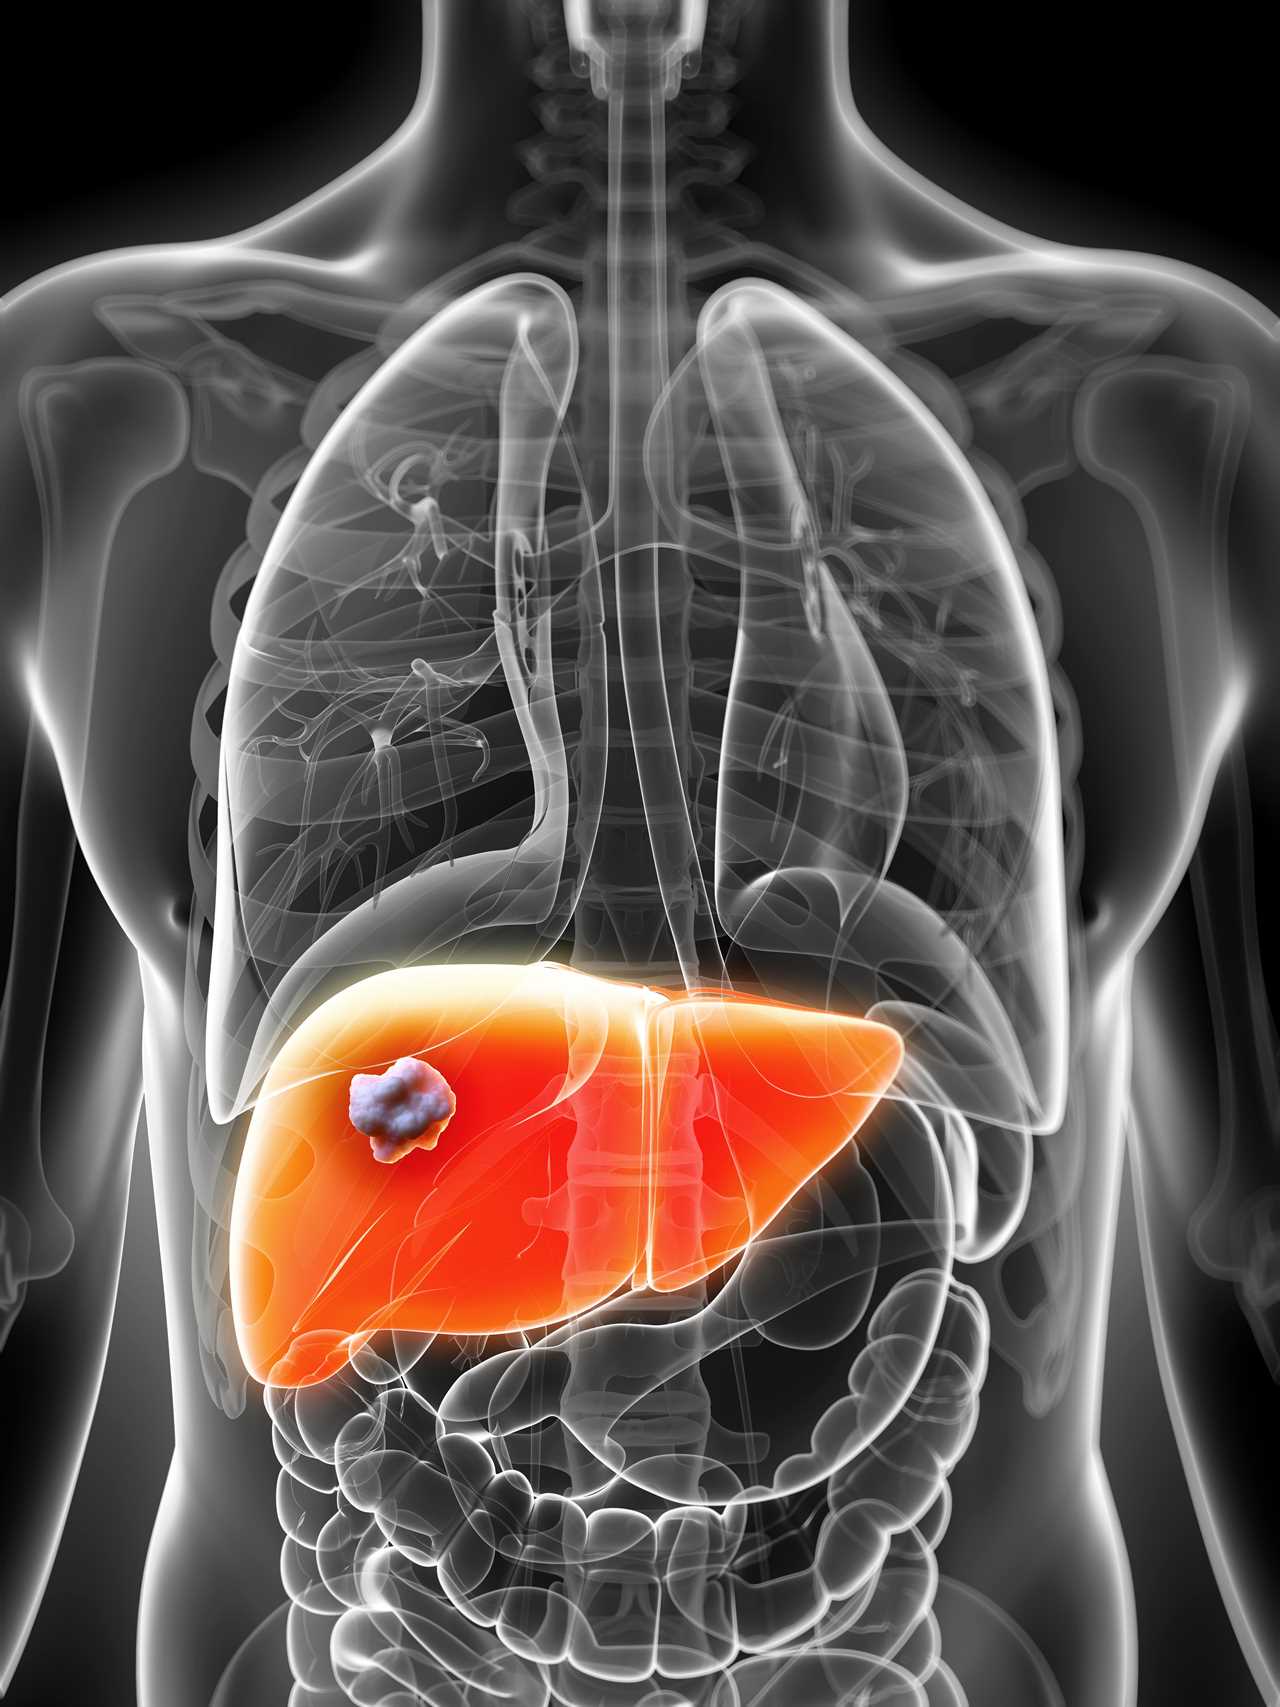 The ‘silent’ symptom of deadly liver cancer you might mistake for indigestion – and 3 other signs you’ve never heard of